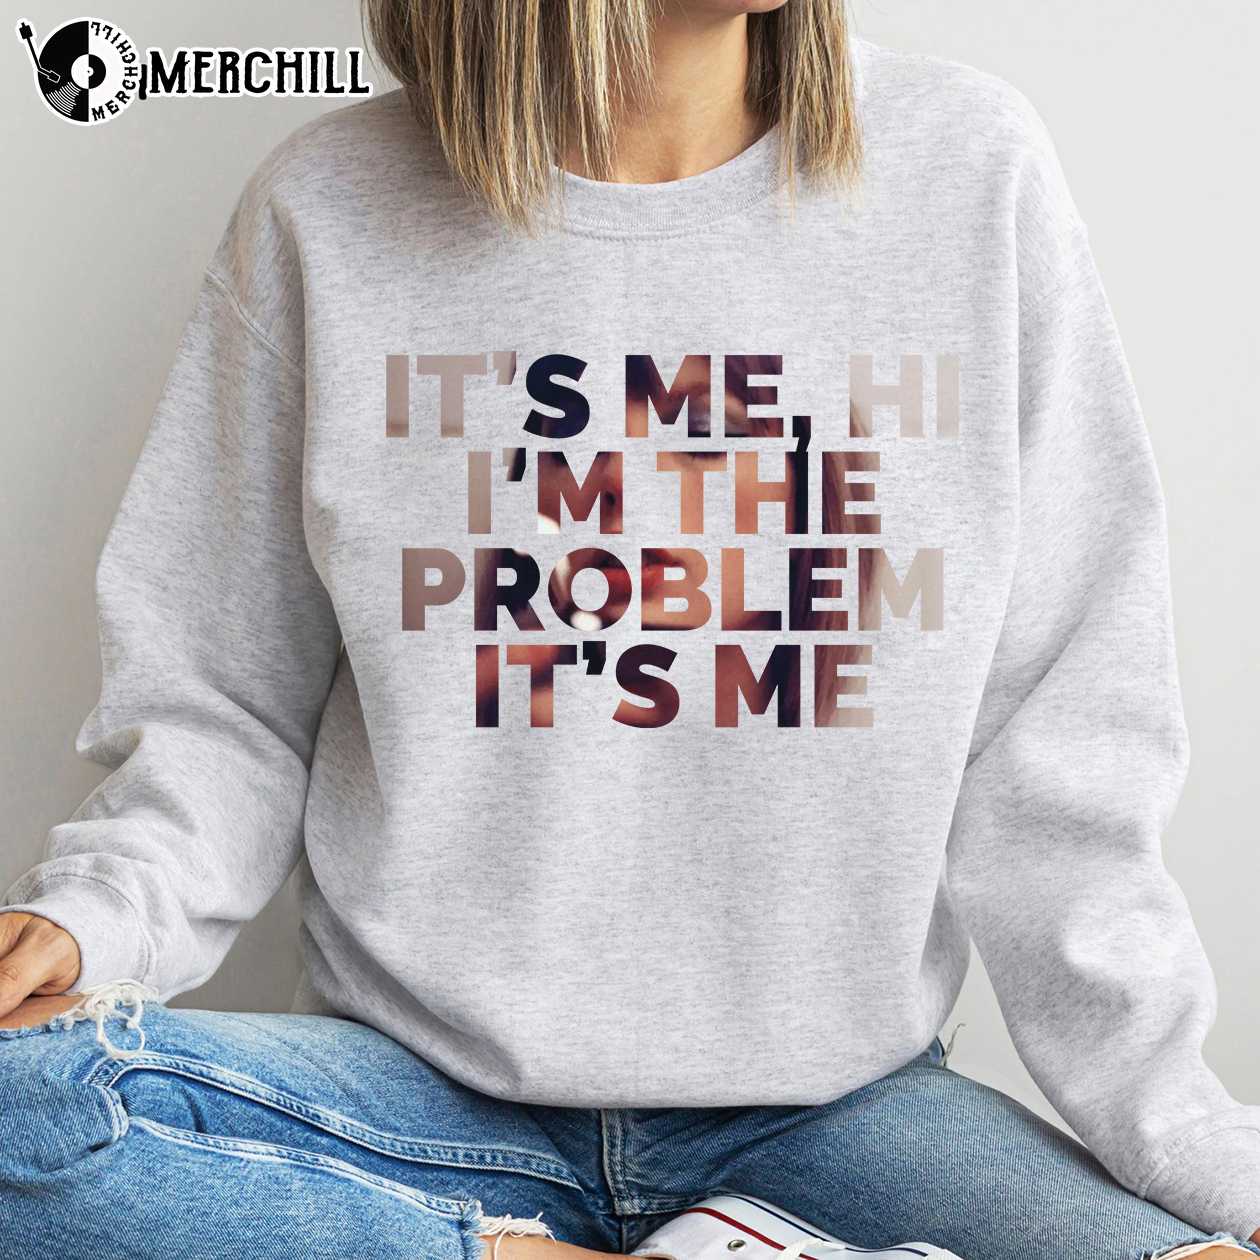 https://images.merchill.com/wp-content/uploads/2022/11/Taylor-Swift-Face-Shirt-Its-Me-Hi-Im-the-Problem-Its-Me-Taylor-Swift-Lover-Gifts.jpg